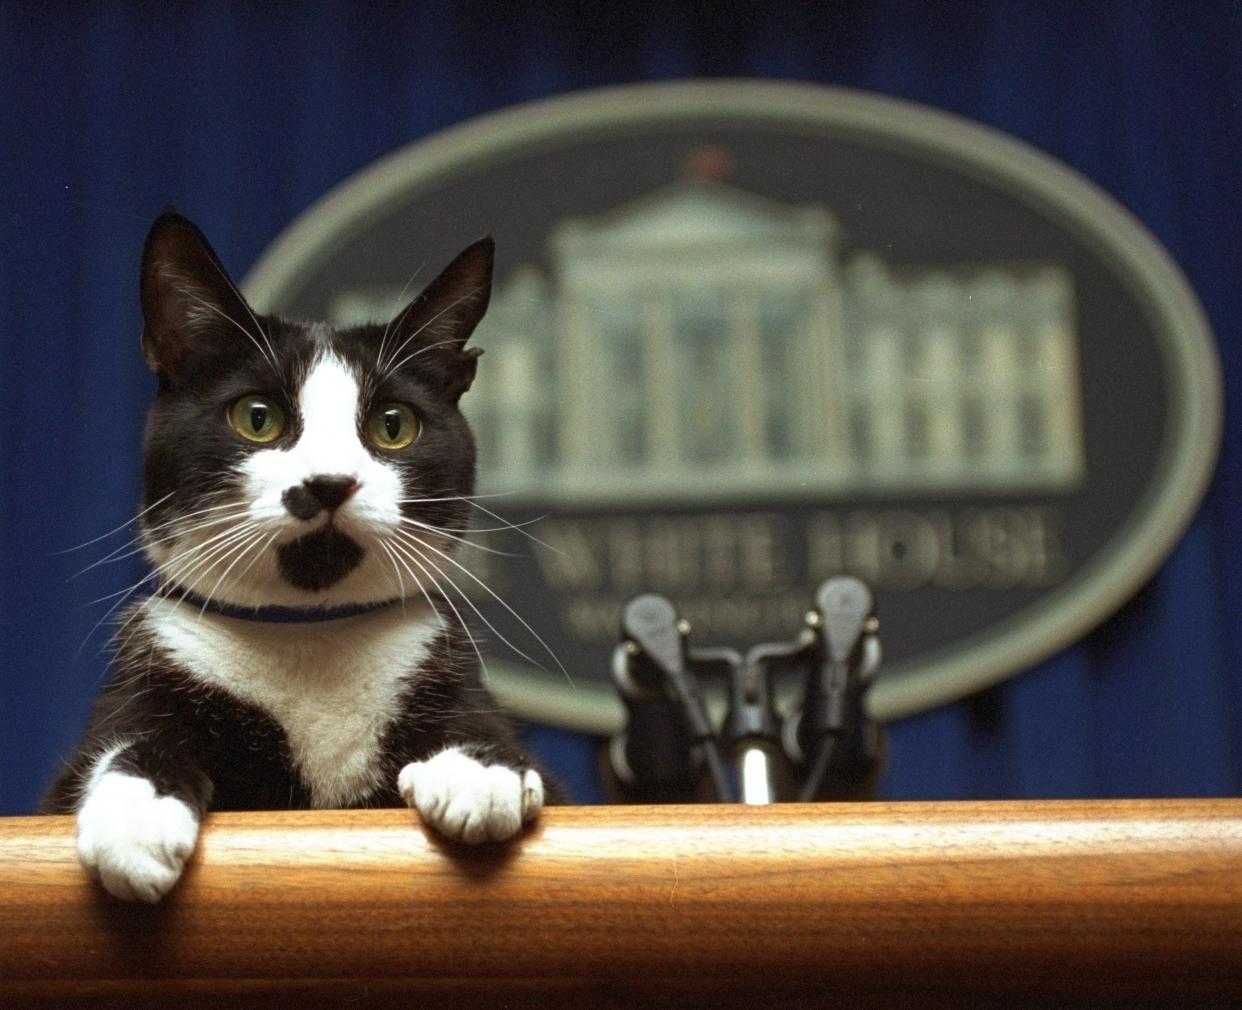 In this March 19, 1994 file photo, President Bill Clinton's cat Socks peers over the podium in the White House briefing room in Washington. The arrival of the Biden pets will also mark the next chapter in a long history of pets residing at the White House after a four-year hiatus during the Trump administration. “Pets have always played an important role in the White House throughout the decades,” said Jennifer Pickens, an author who studies White House traditions. (AP Photo/Marcy Nighswander, File)